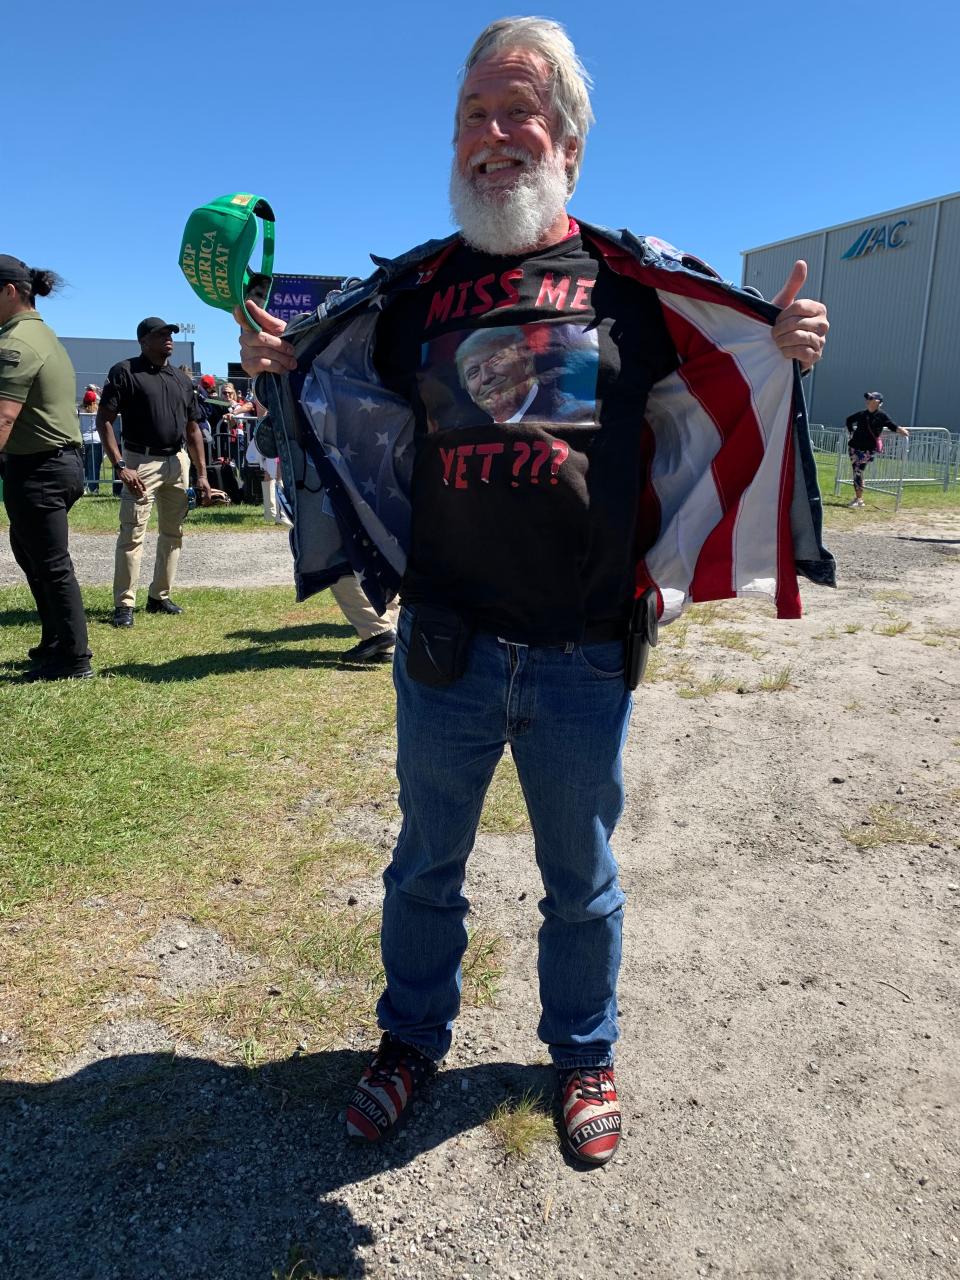 Edward Young shows off a Donald Trump shirt while waiting to enter the Aero Center at Wilmington International Airport in advance of a rally featuring the former president.